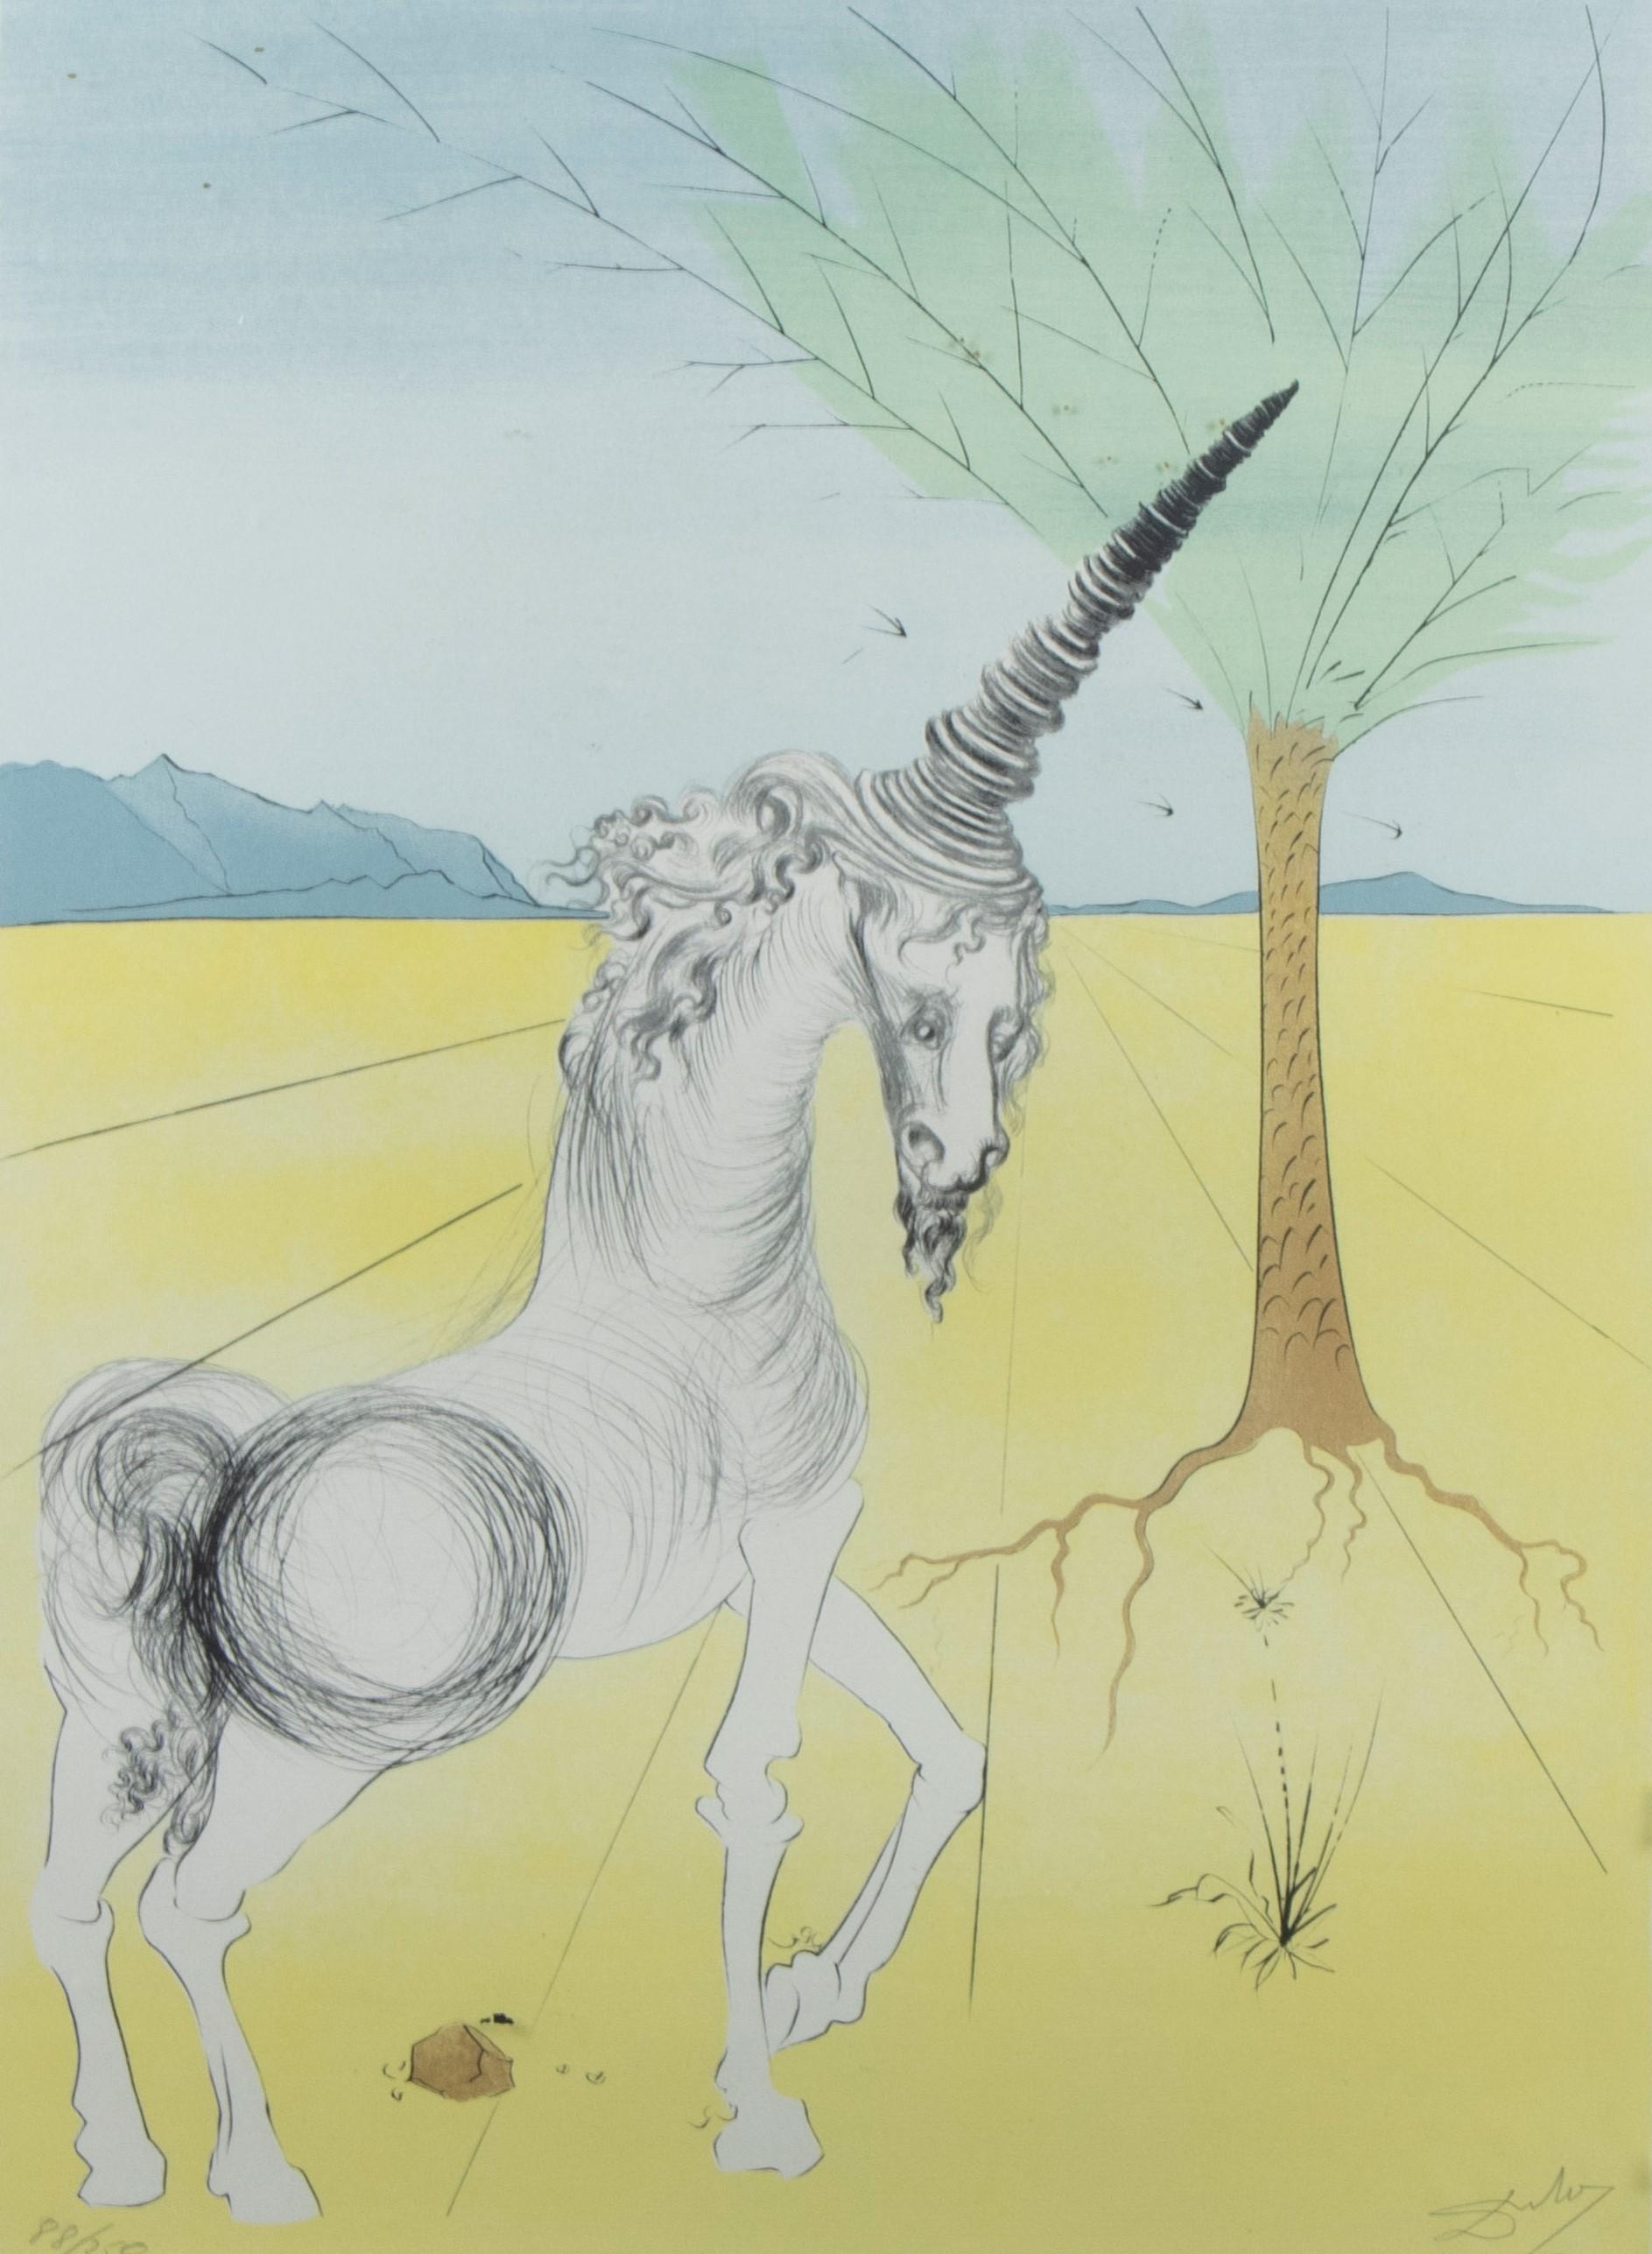 The Twelve Tribes Of Israel by Salvador Dalí